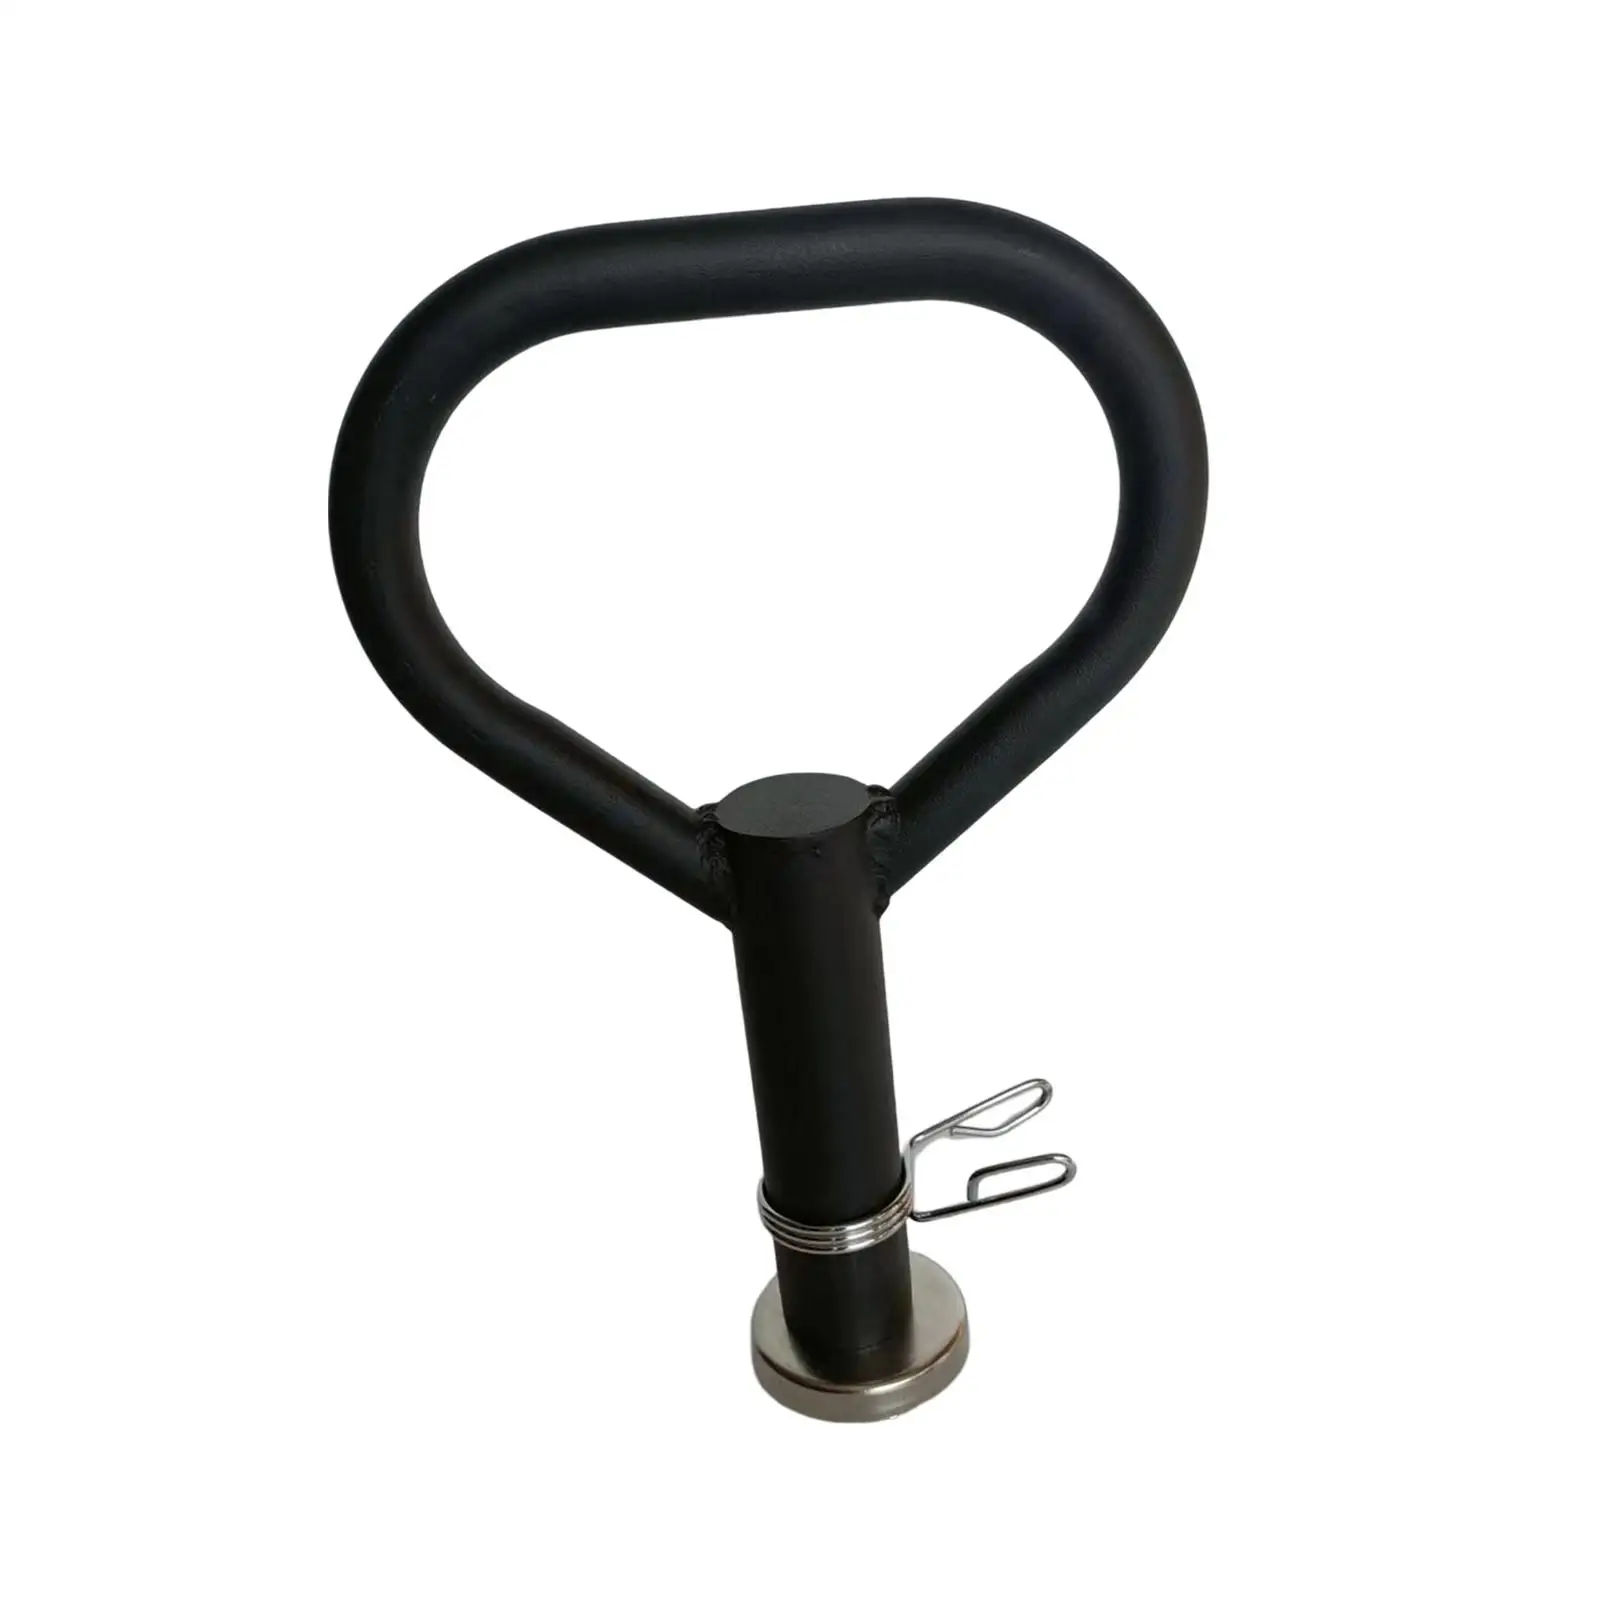 Removable Kettlebell Handle Equipment Supplies Multifunction Durable with Tool Professional Comfortable for Gym Sports Push up